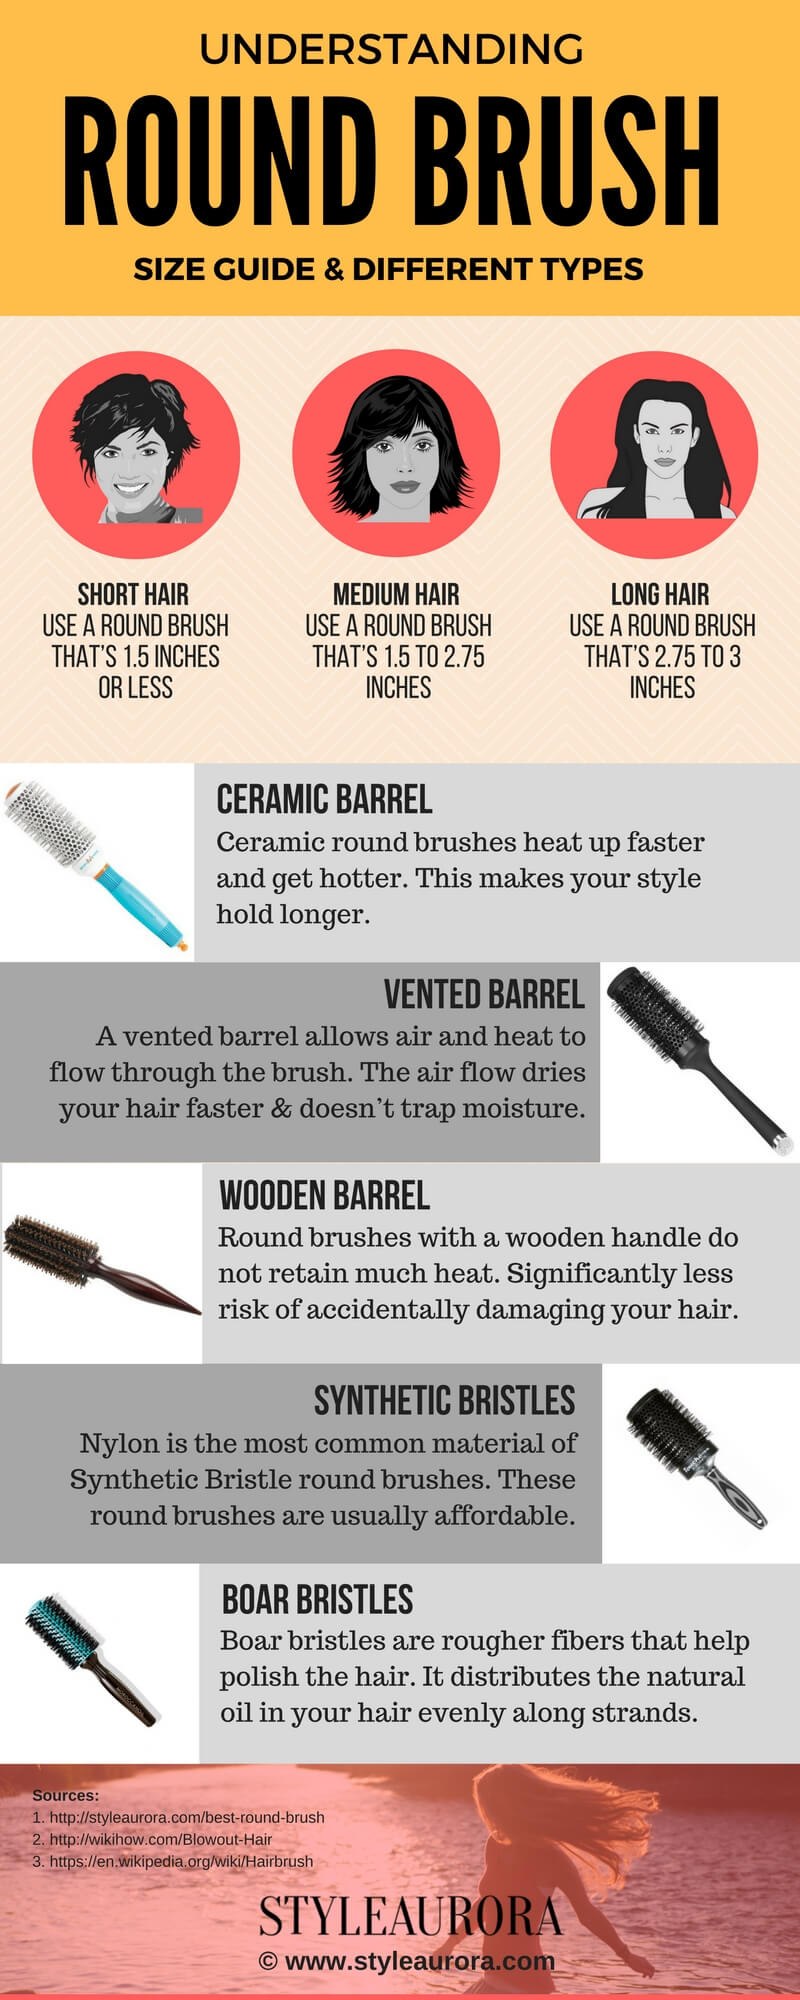 Round Brush Size Guide Infographic